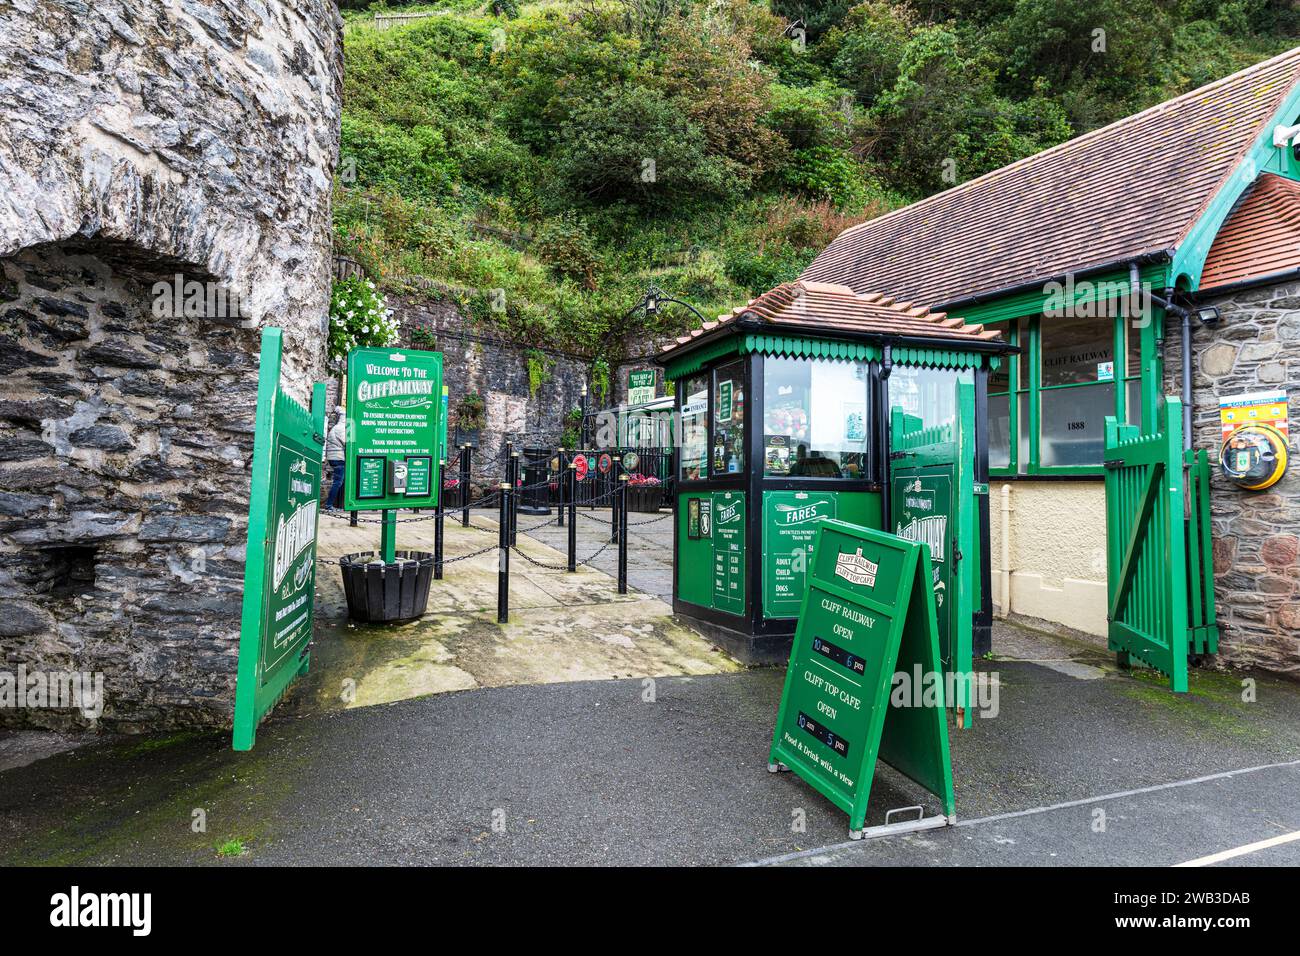 Lynton And Lynmouth Cliff Railway, Lynton And Lynmouth, Devon, UK, England, Lynton & Lynmouth Cliff Railway,Lynton & Lynmouth, Cliff Railway, funicula Stock Photo